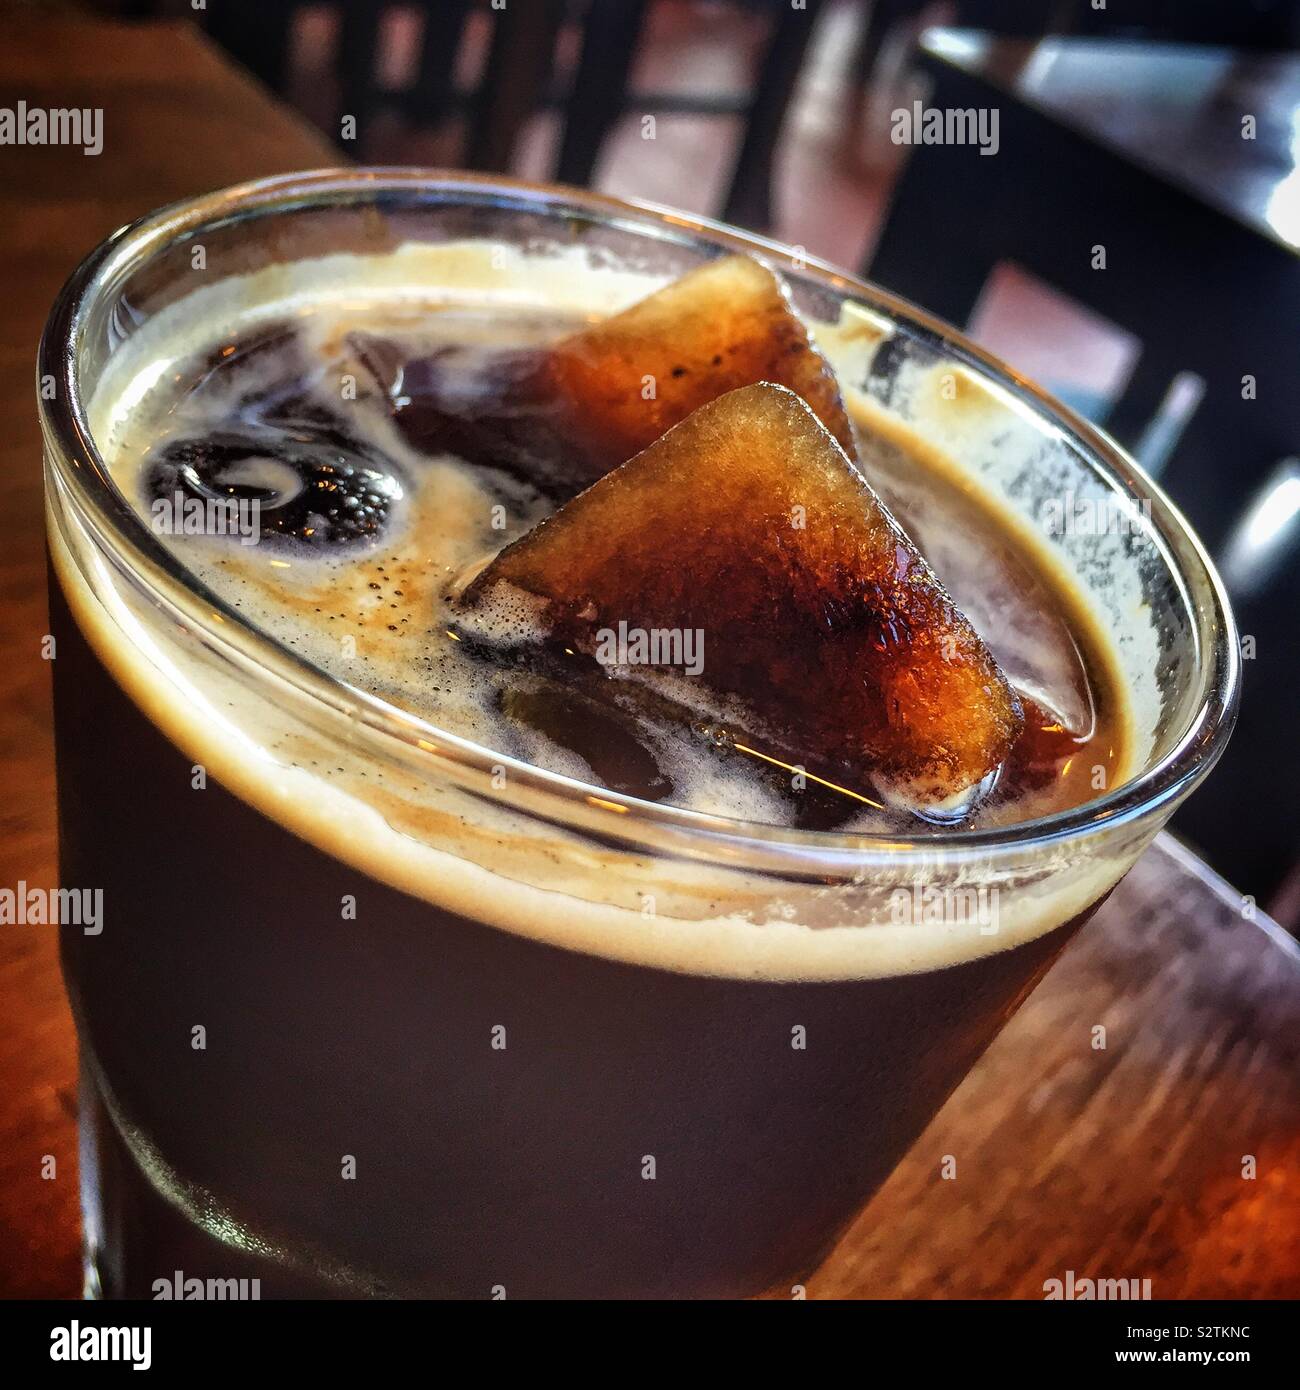 Iced coffee at Antipodean Café, a restaurant in Kuala Lumpur, Malaysia that buys its coffee beans directly from small-holding growers and roasts them in-house Stock Photo